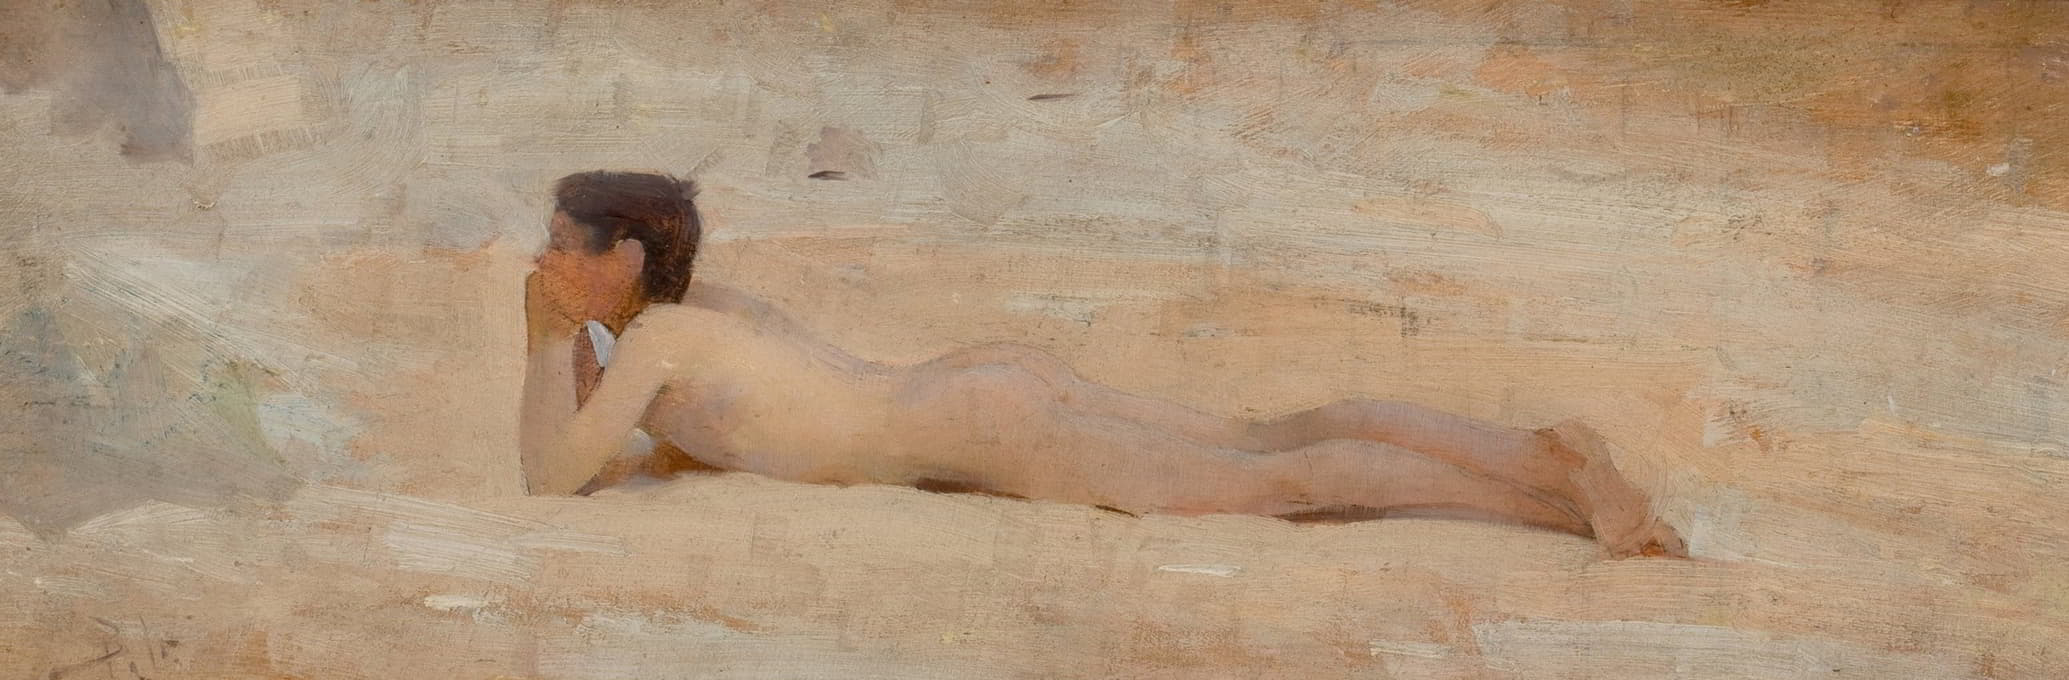 Edwin Bale - Nude Reclining on House Roof